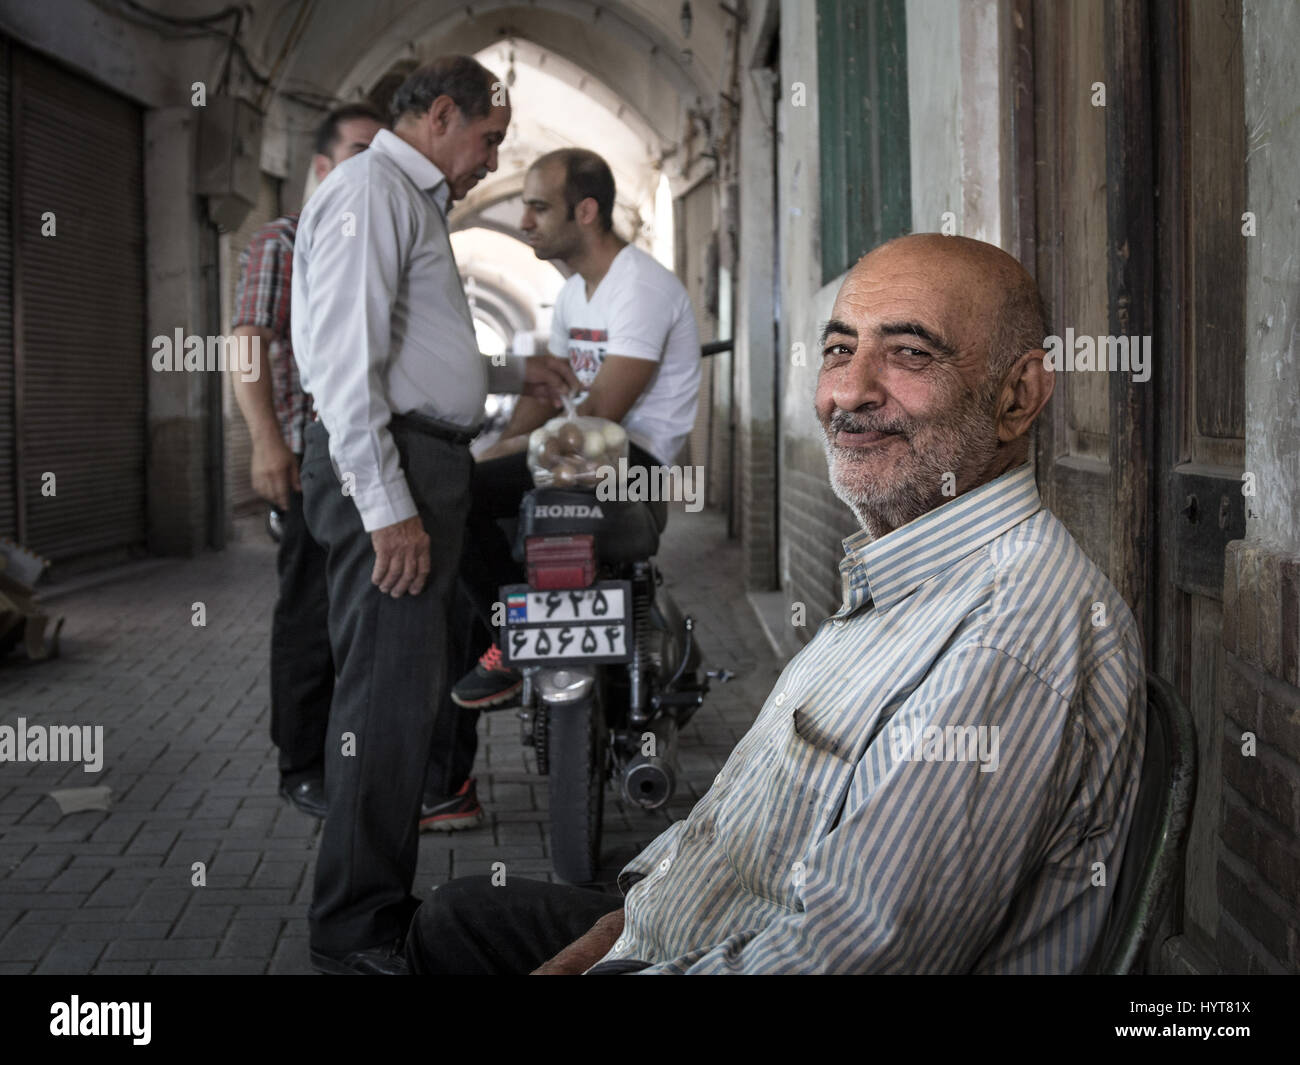 KASHAN, IRAN - AUGUST 13, 2016: Old Iranian egg seller smiling after a closing deal with fellow Iranian people in the background in Kashan Bazaar  Baz Stock Photo